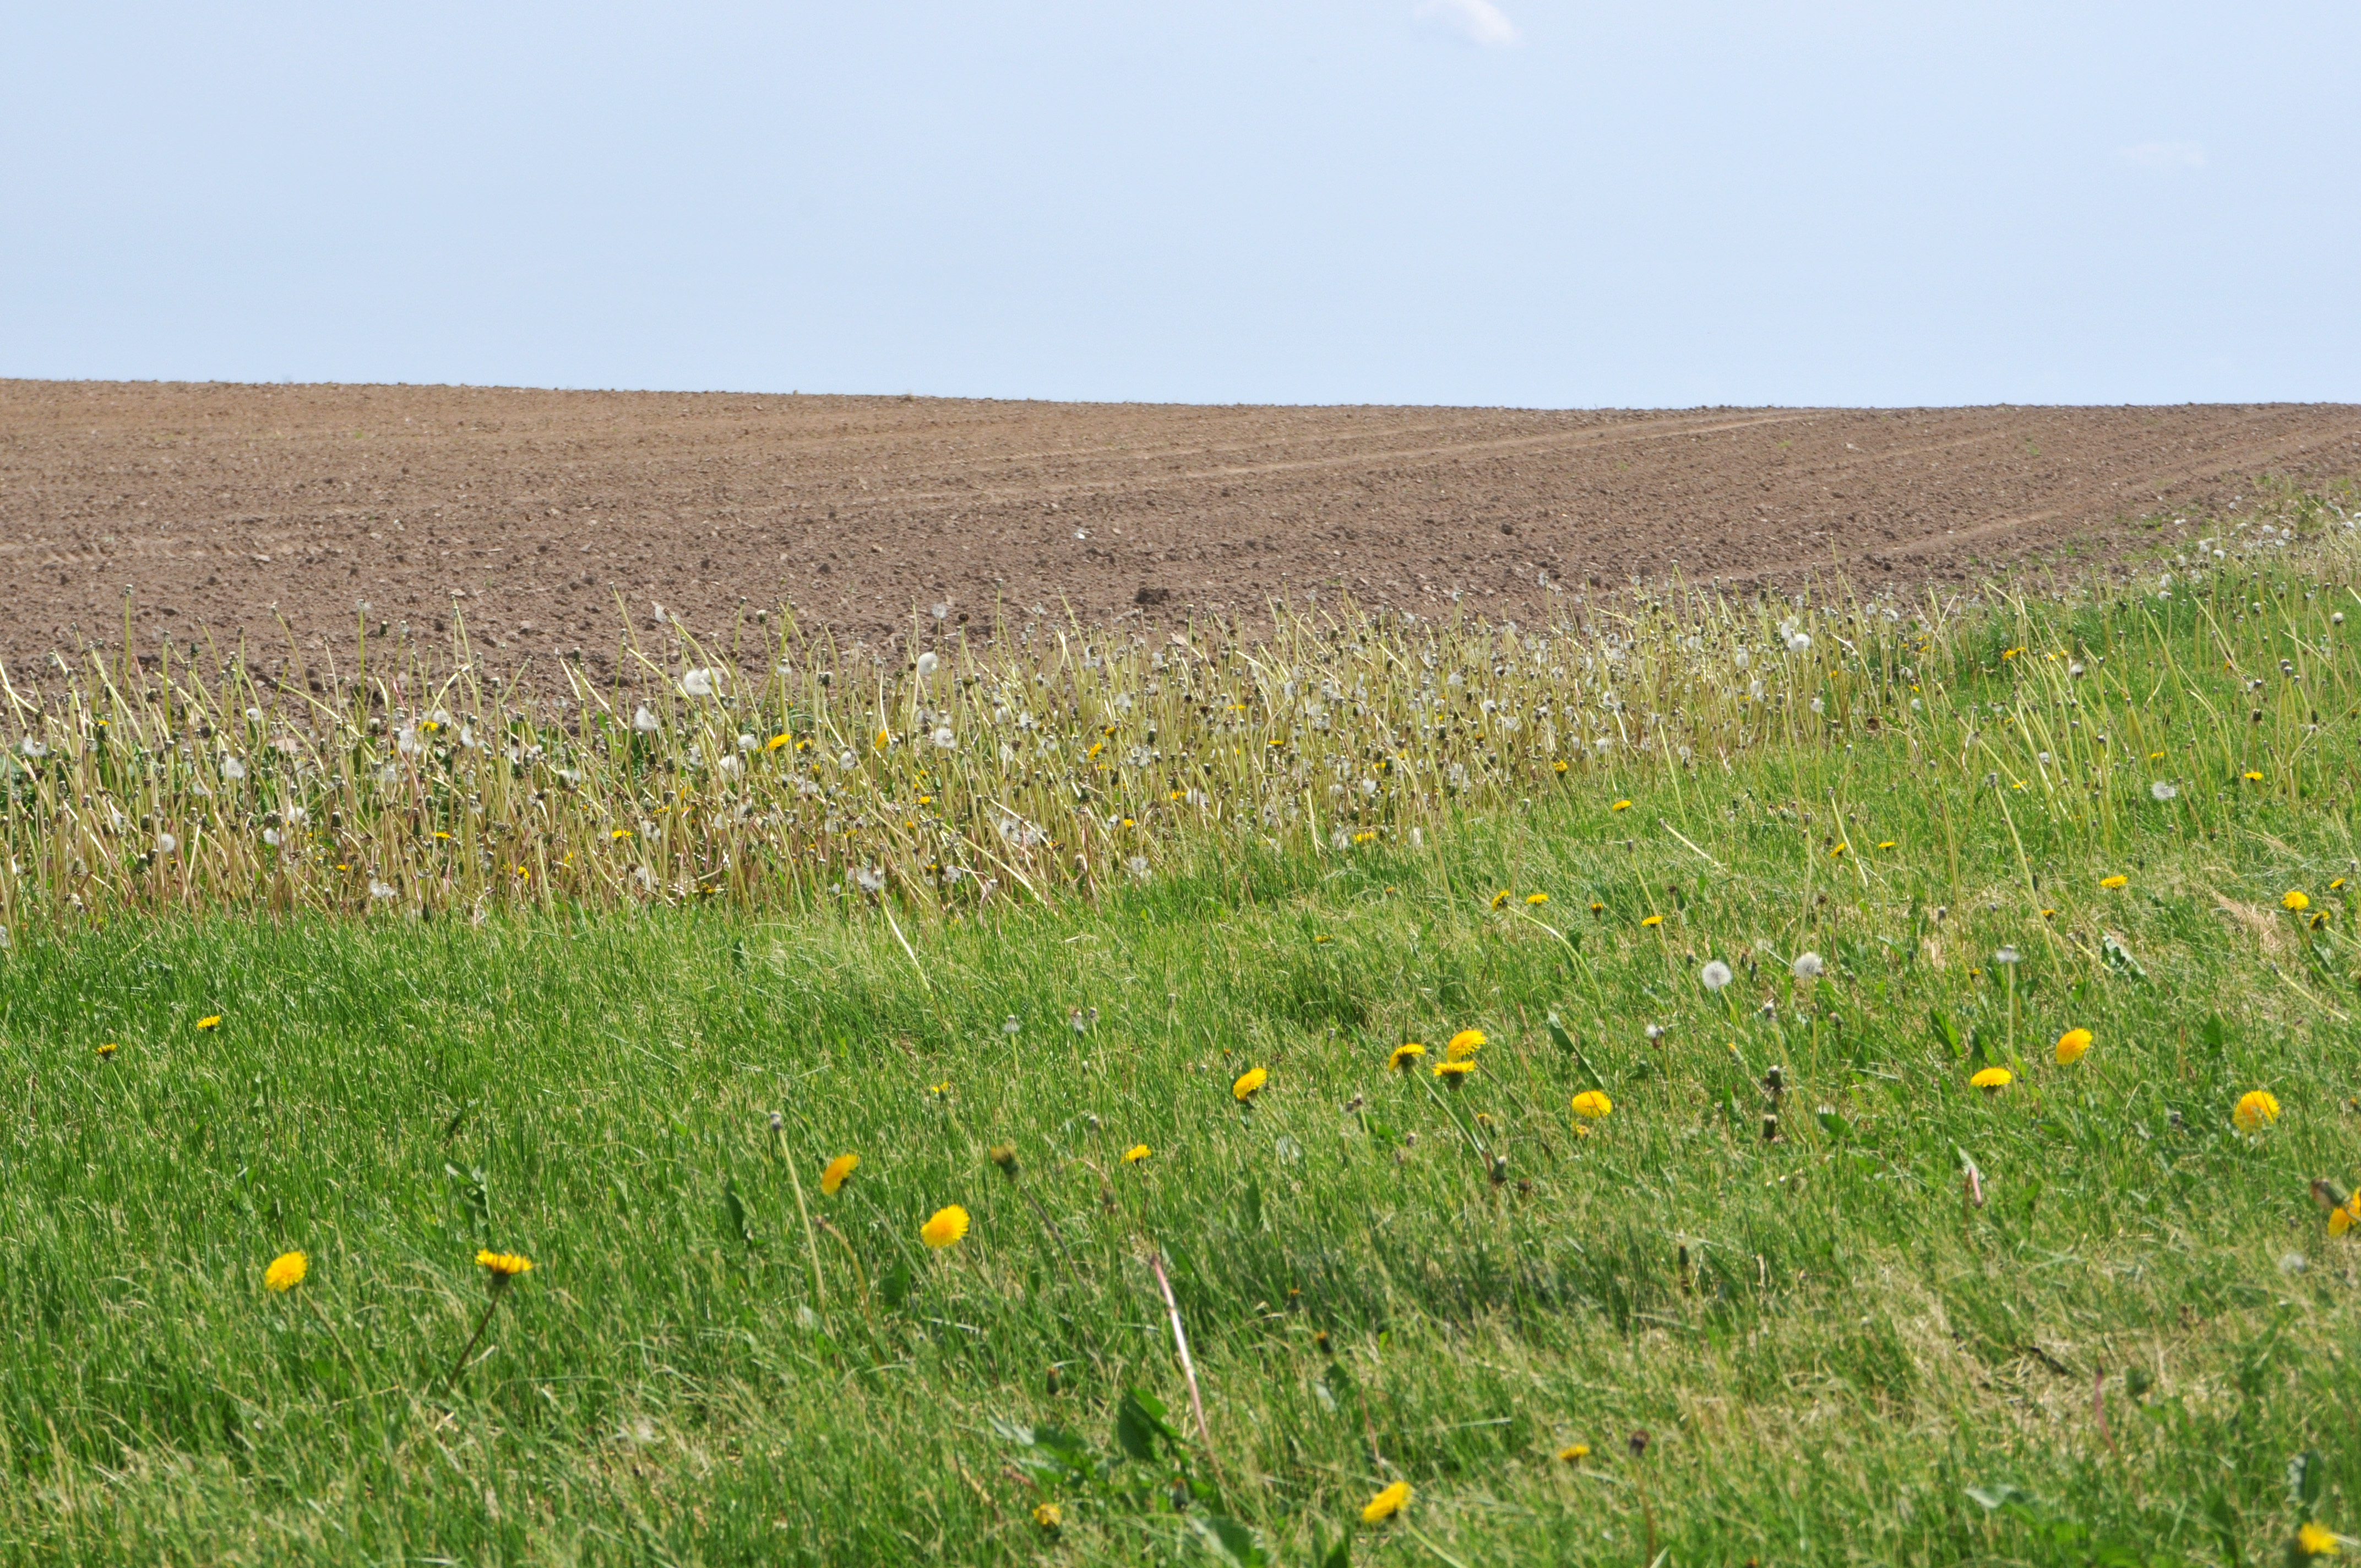 Insecticides applied to the agricultural field could drift onto the dandelions where honey bees forage.